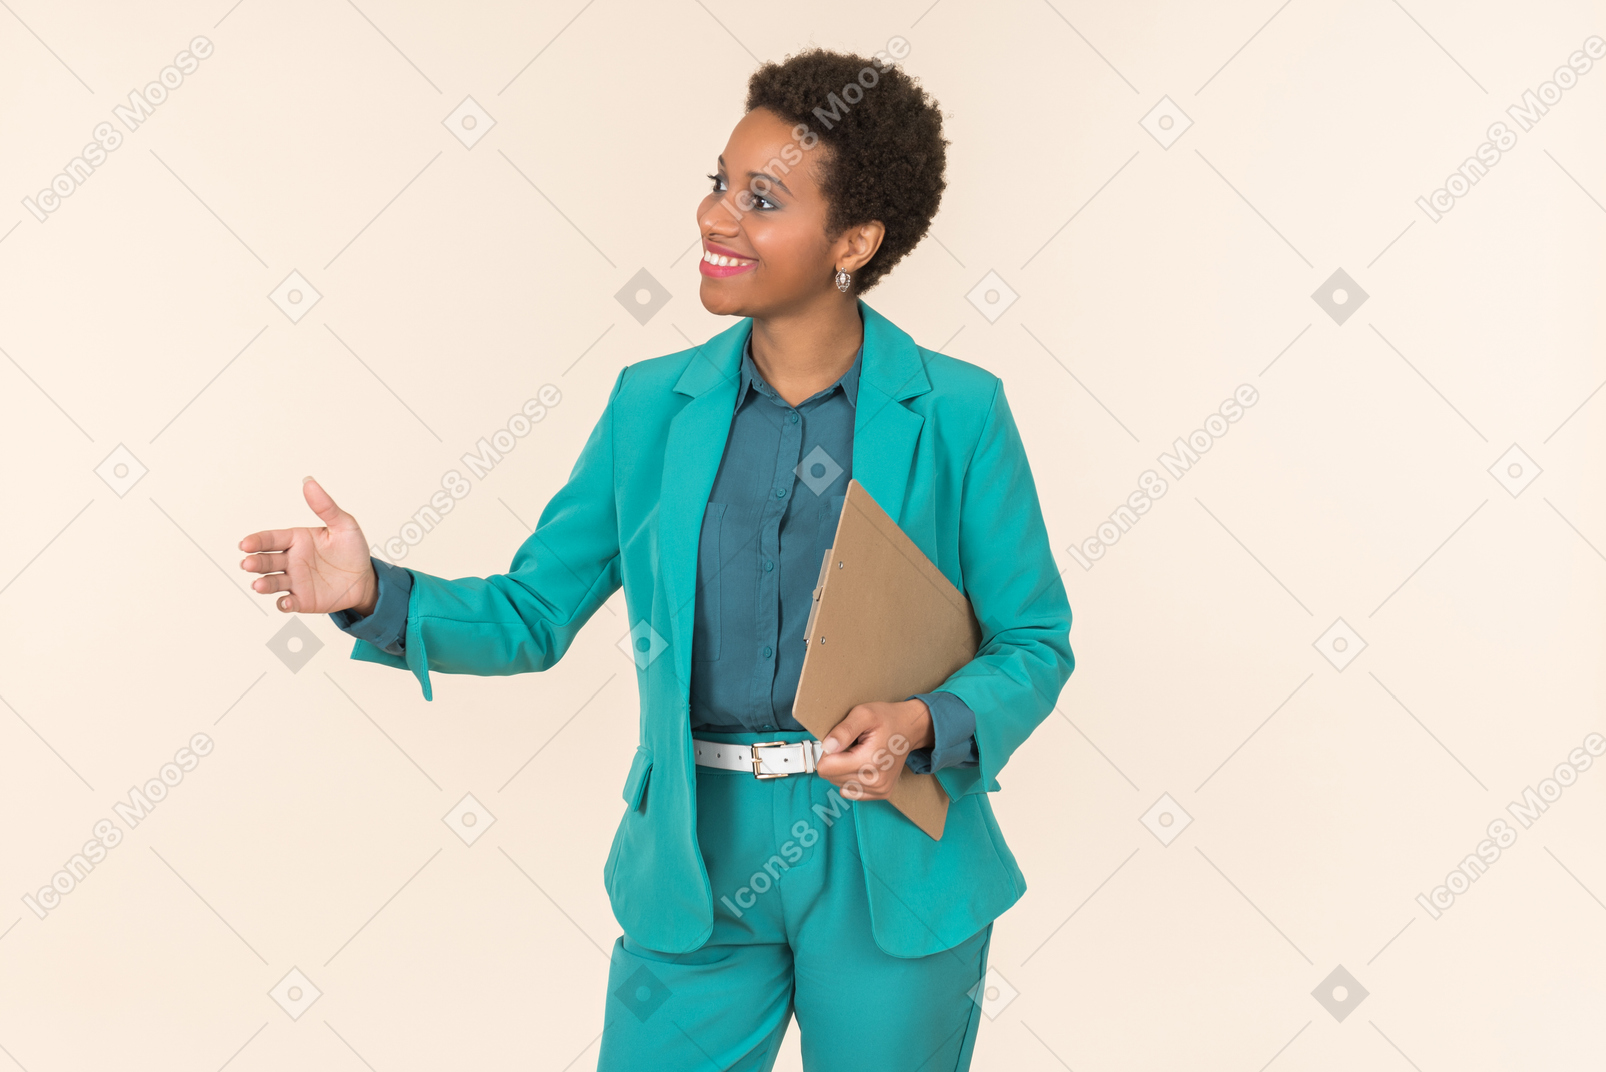 Female office worker extending hand for welcoming and holding folder